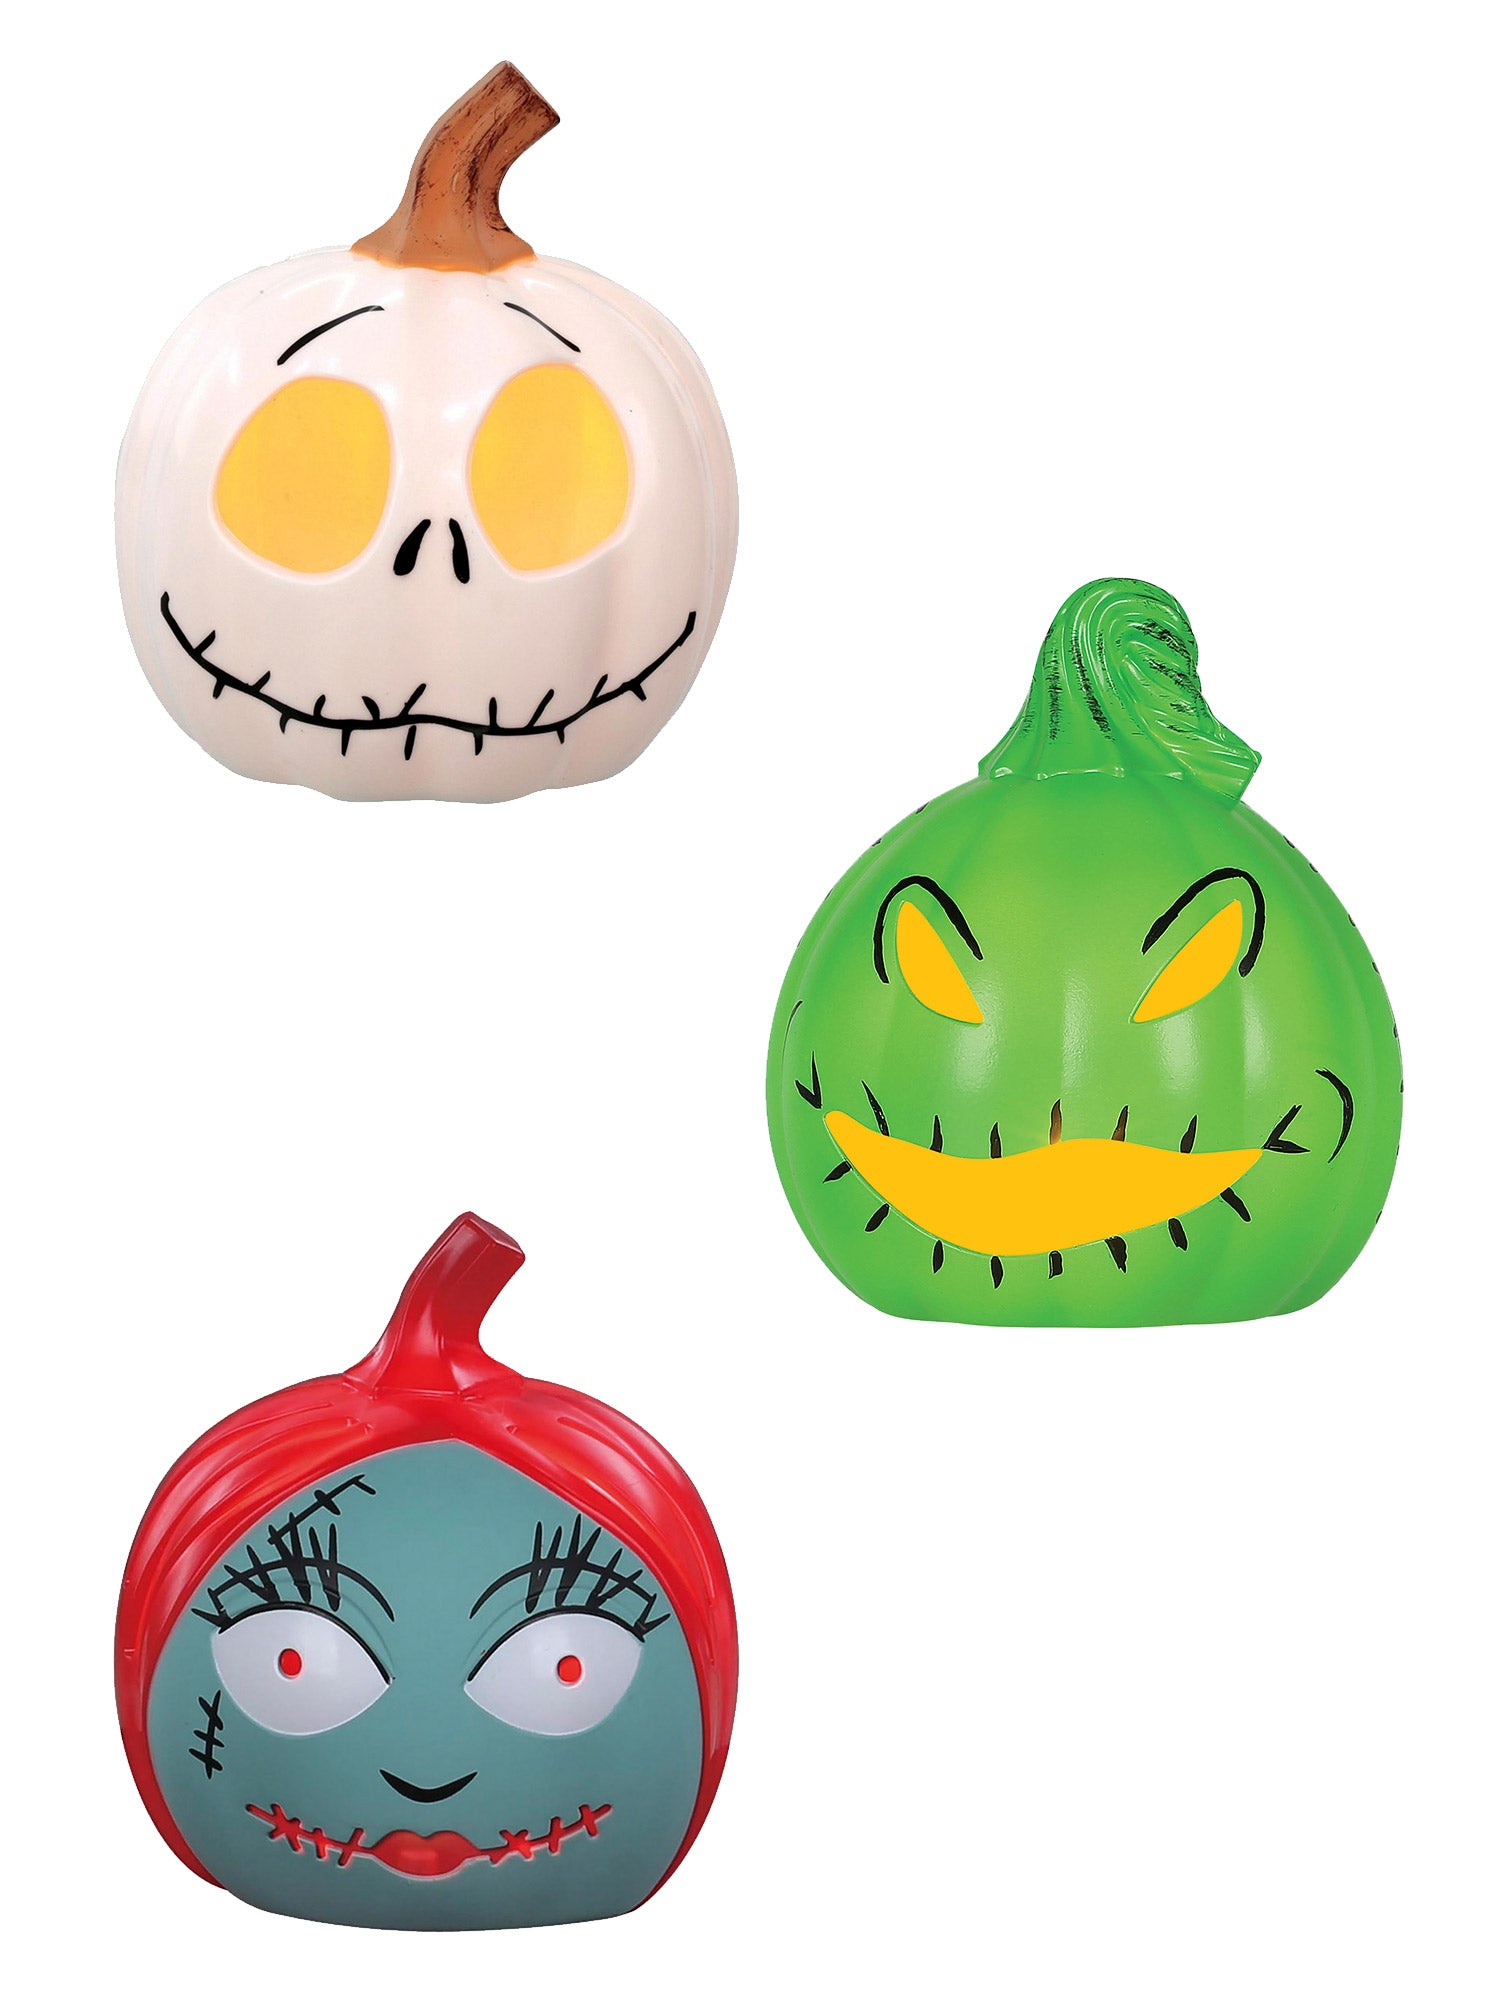 3.25 Inch The Nightmare Before Christmas 3 Character Assortment Light Up Pumpkin - costumes.com